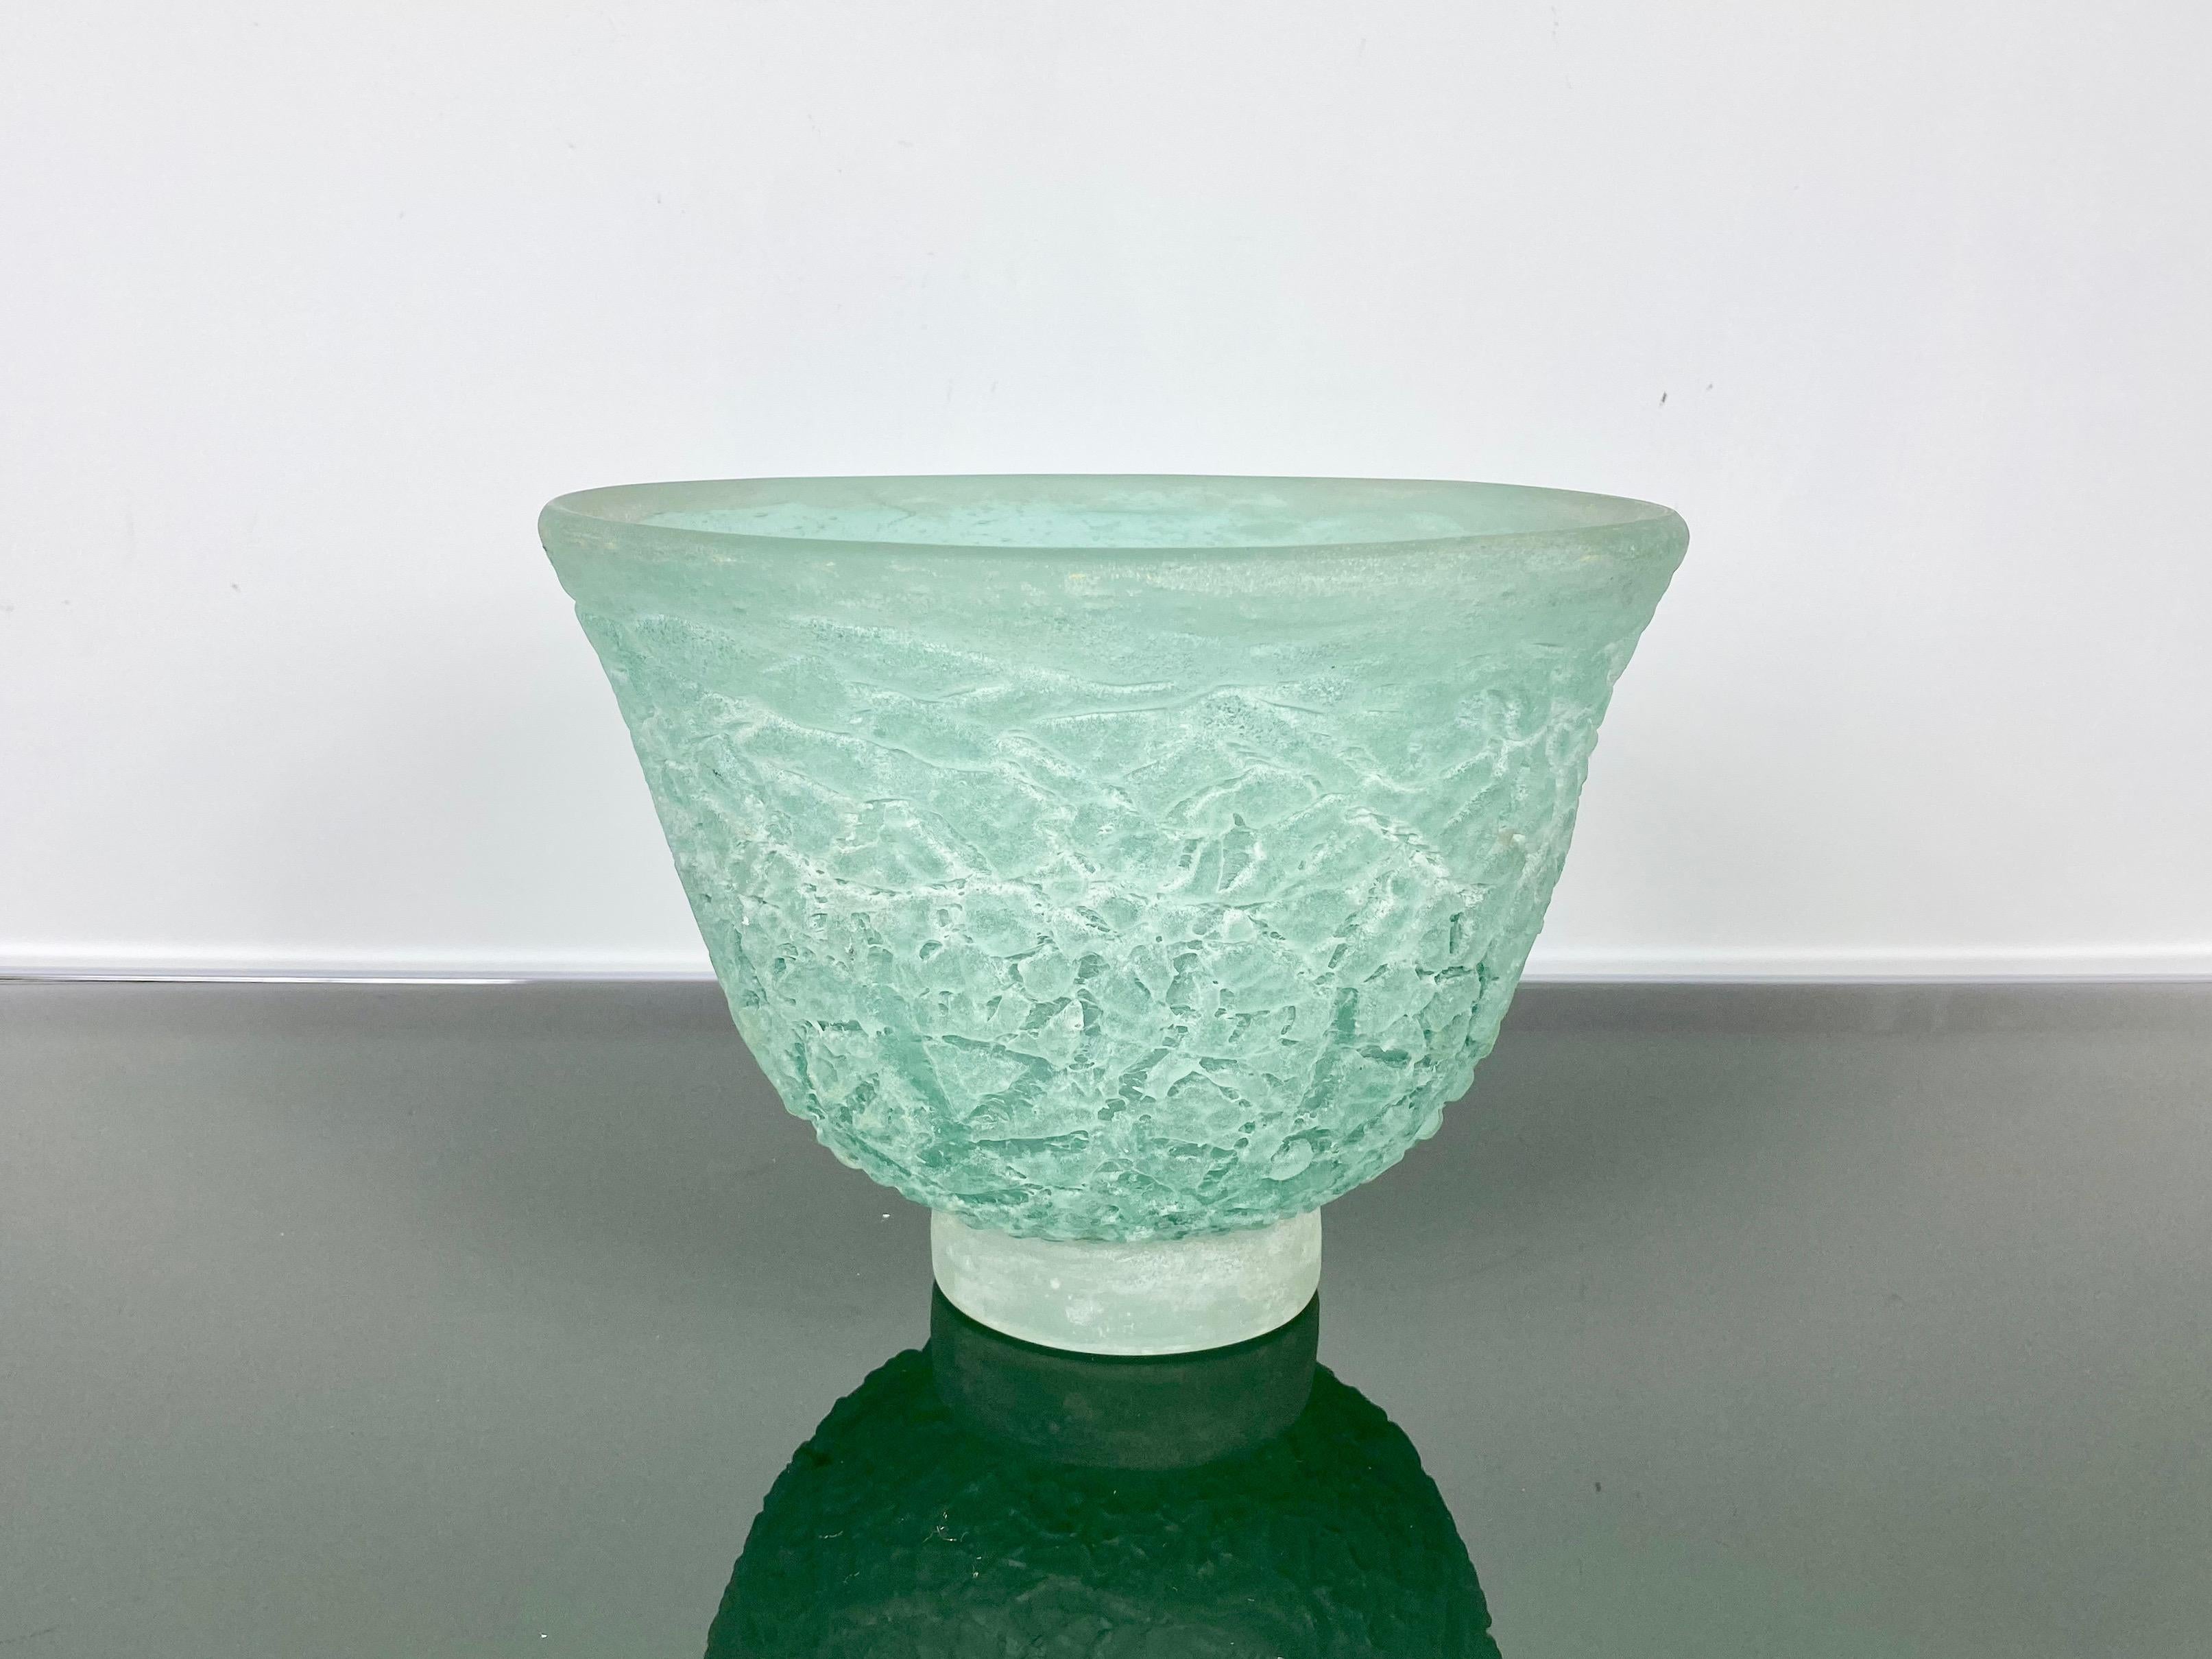 This absolutely gorgeous and monumental signed Italian Murano Cenedese sculptural hand blown glass centre piece bowl is of the scavo technique. It is from the 1970s. The luscious color of the light turquoise mixed in with patches of light black or